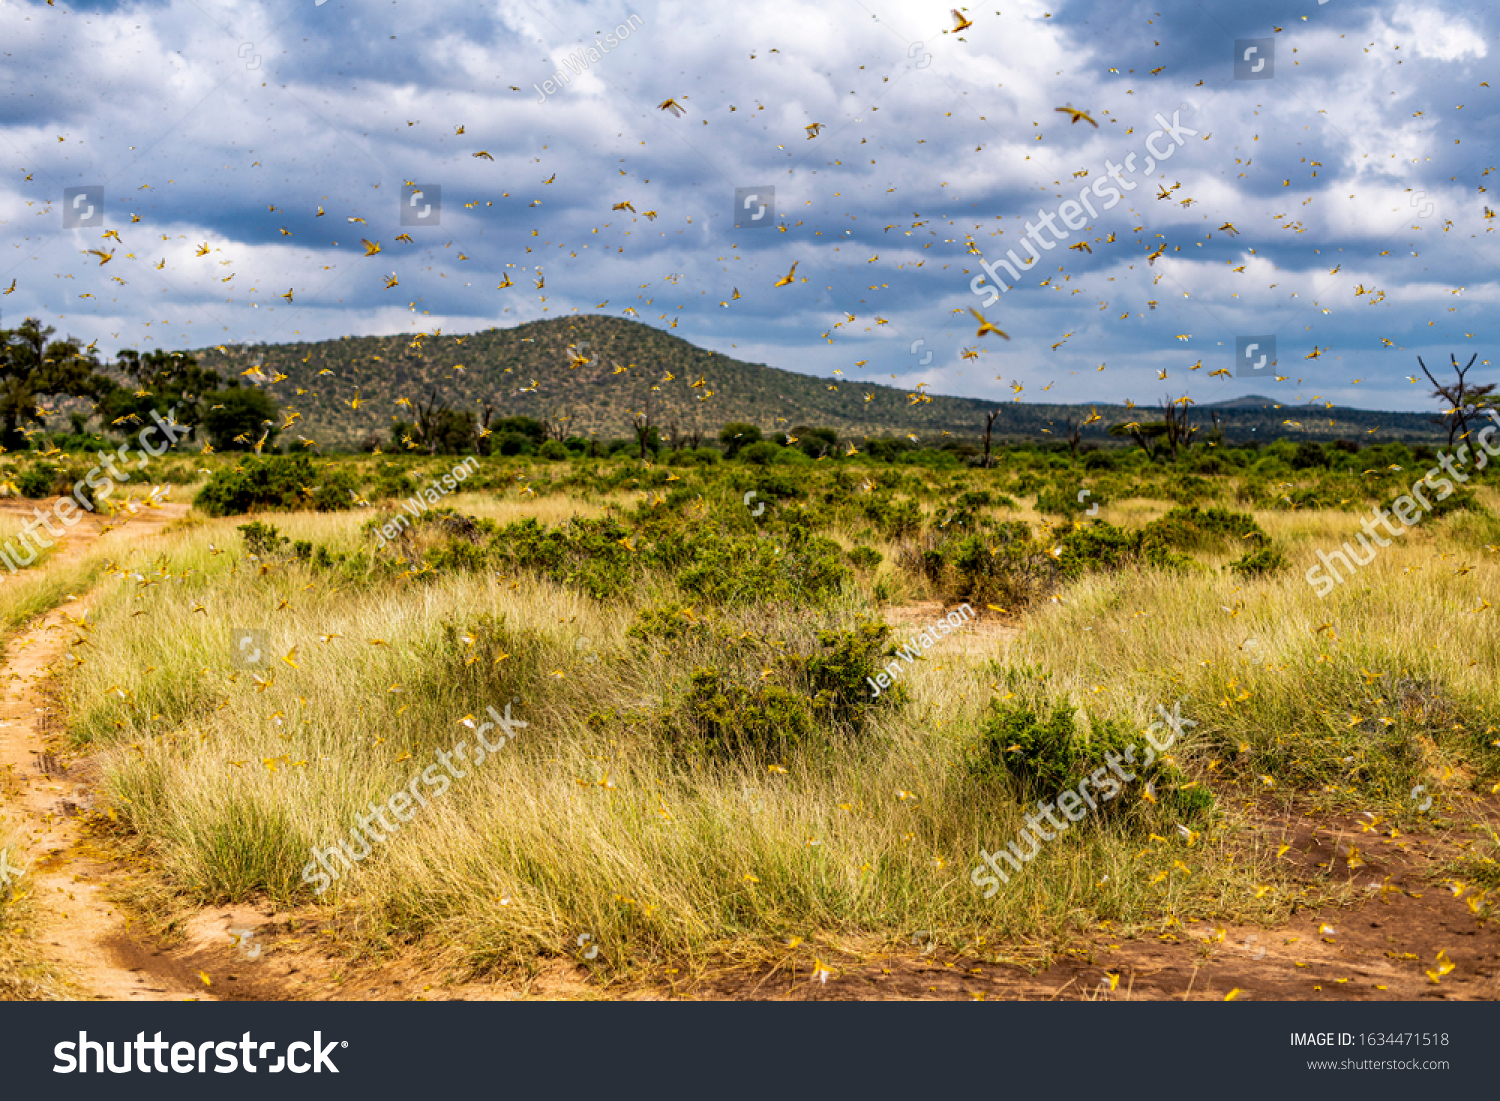 Samburu landscape viewed through swarm of invasive, destructive Desert Locusts. This flying pest is difficult to control and spreads quickly, up to 150km (90 miles) per day. Schistocerca gregaria #1634471518